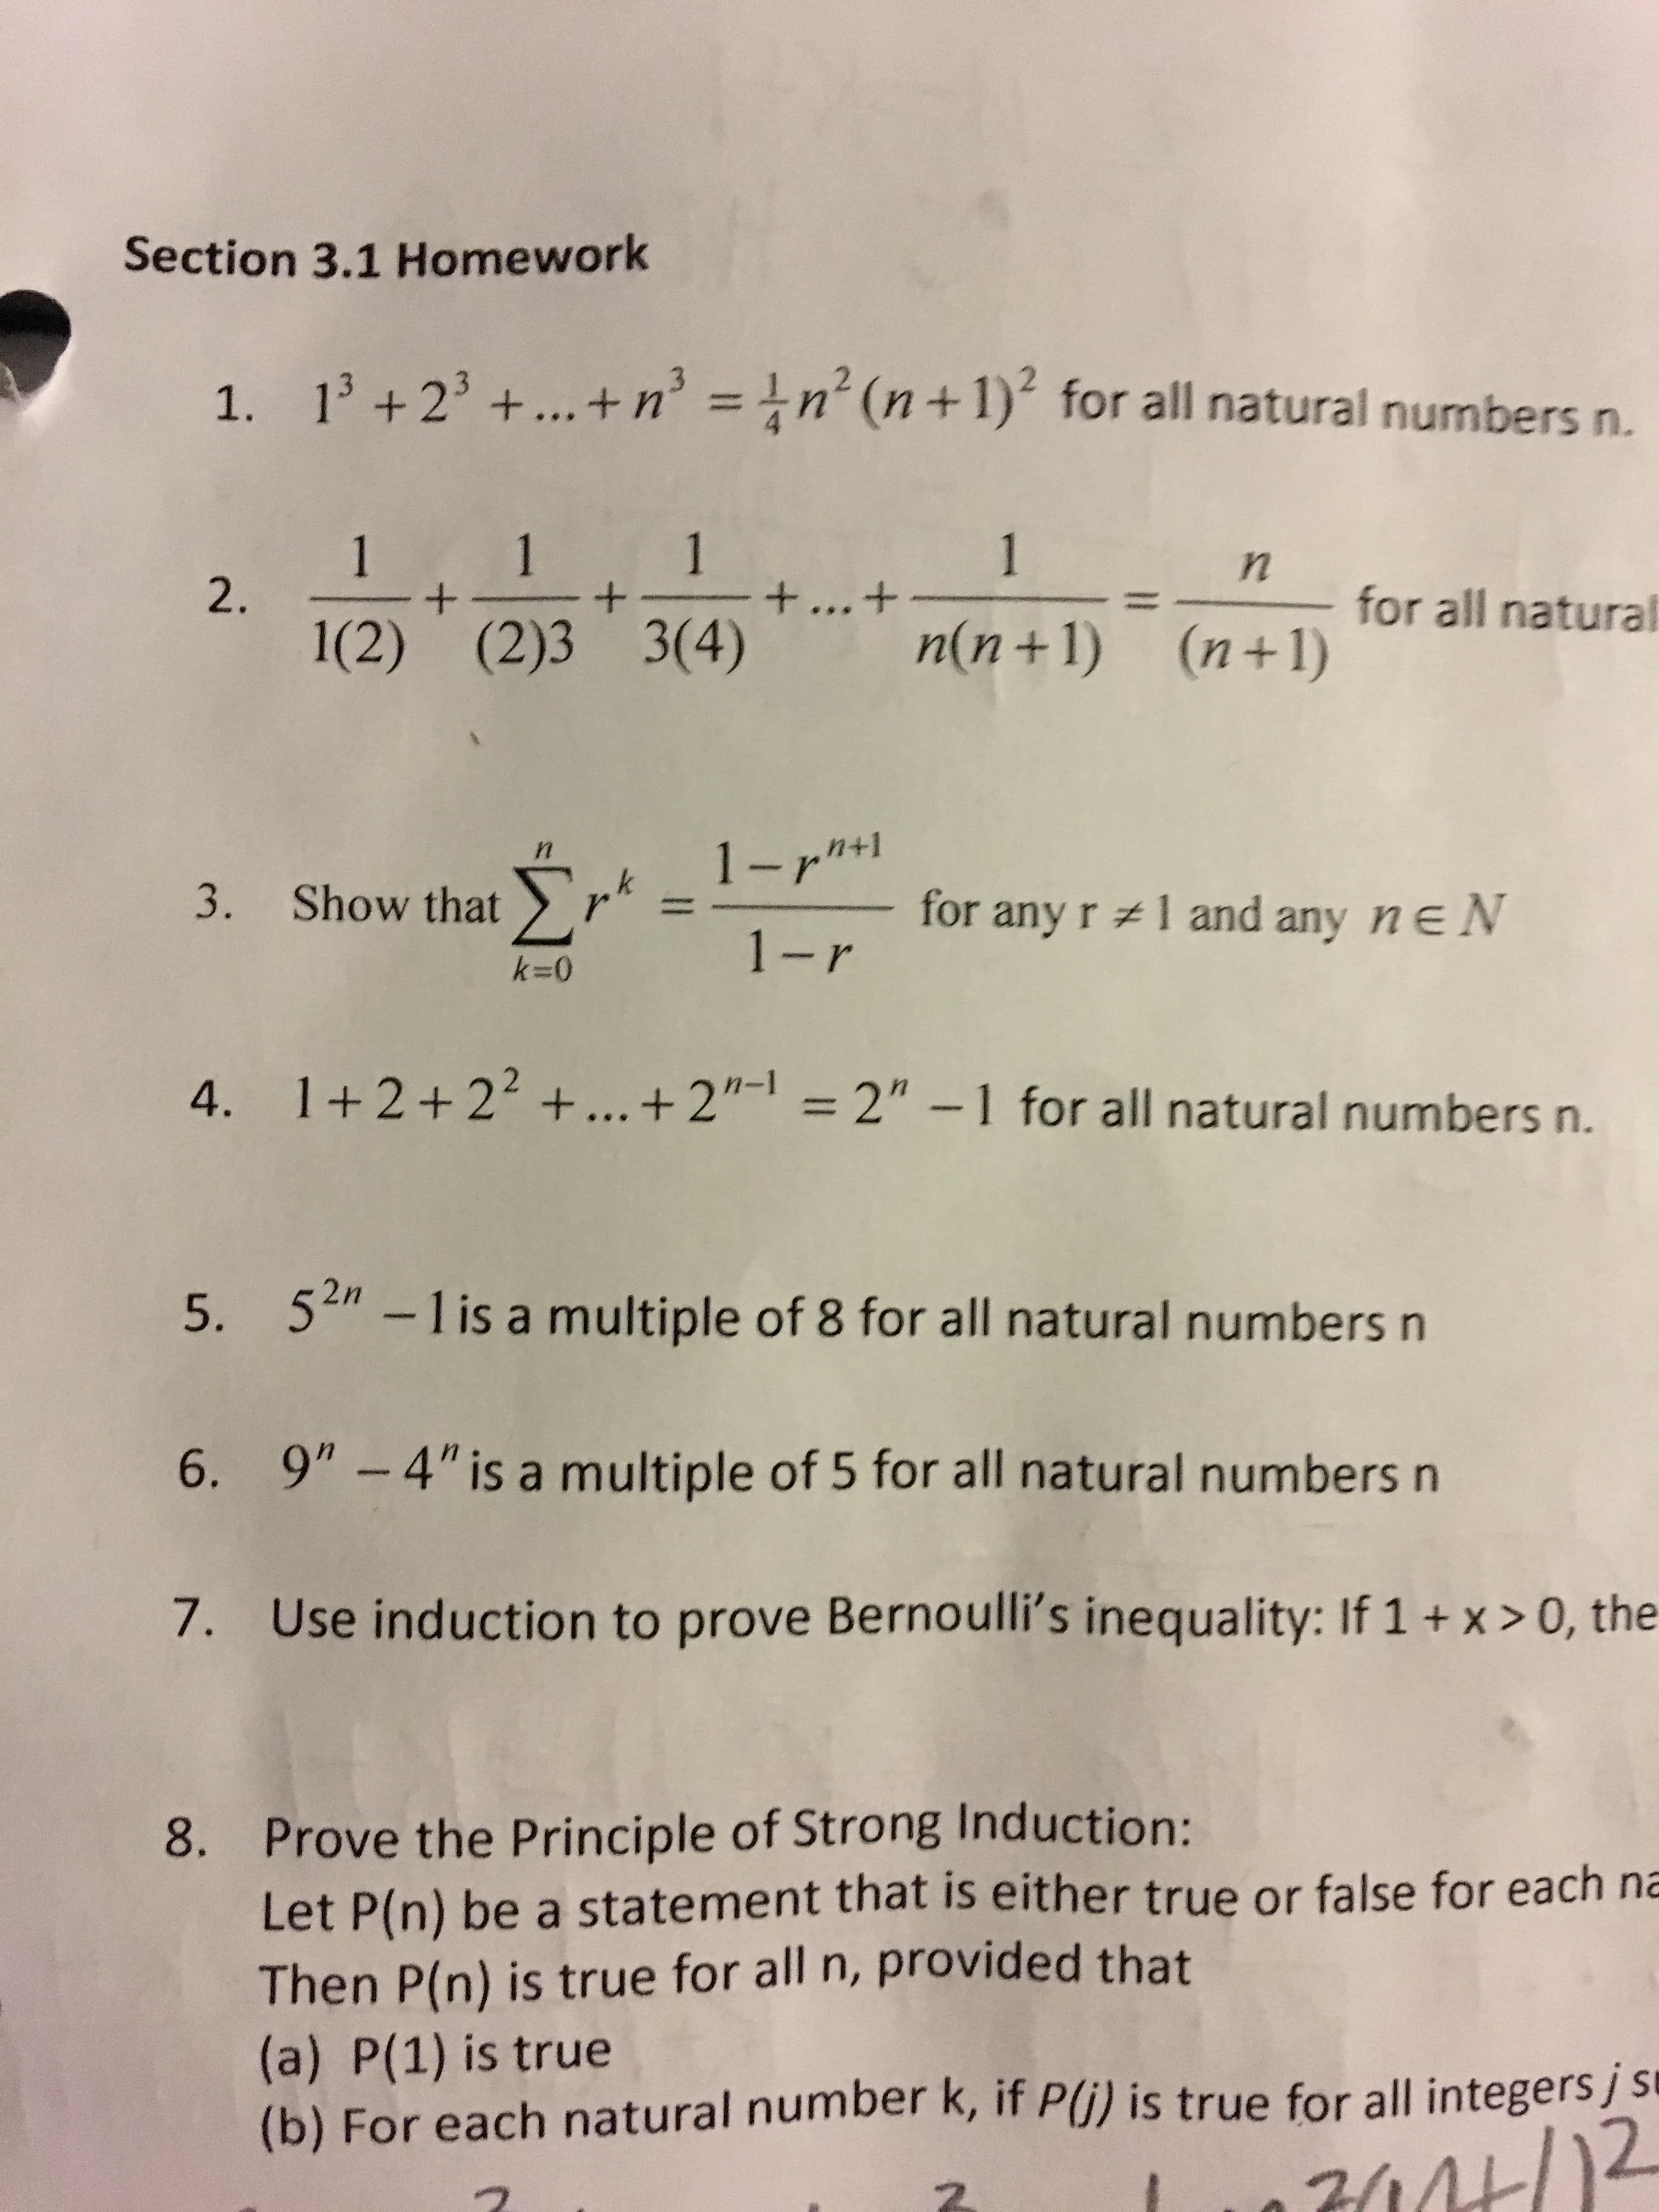 Section 3.1 Homework
13 +23+... +n = 1n (n +1) for all natural numbers n.
1.
1
+ ... +
1
1
1
+
for all natural
+
2.
n(n+1) (n+1)
1(2) (2)3 3(4)
1-r*
n
1 and any ne N
for any r
3. Show thatr"
1-r
k=0
1+2+22 +... + 2"- = 2" -1 for all natural numbers n.
4.
52 -1 is a multiple of 8 for all natural numbers n
5.
9" - 4" is a multiple of 5 for all natural numbers n
6.
Use induction to prove Bernoulli's inequality: If 1 + x > 0, the
7.
1
Prove the Principle of Strong Induction:
Let P(n) be a statement that is either true or false for each na
Then P(n) is true for all n, provided that
(a) P(1) is true
(b) For each natural number k, if P(i) is true for all integers j s
8.
7444/ )2
